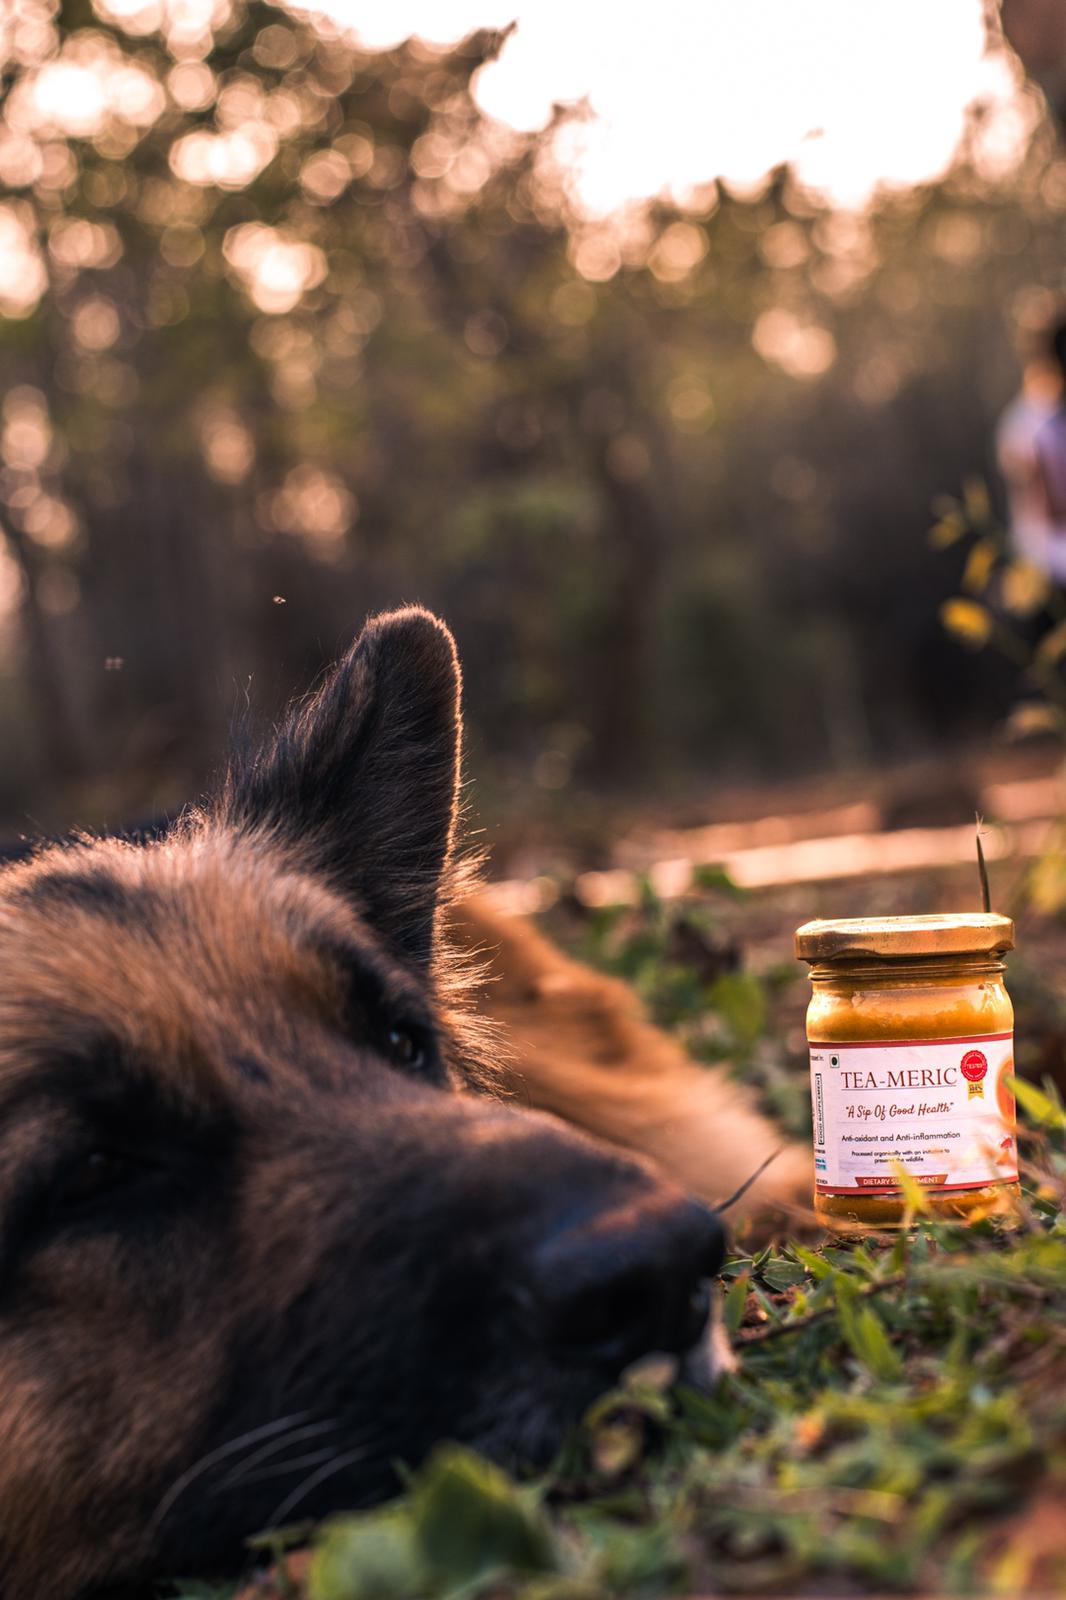 German Shepherd dog Buzzo sitting with a bottle of Teameric, a turmeric-based tea from Bagdara Farms.